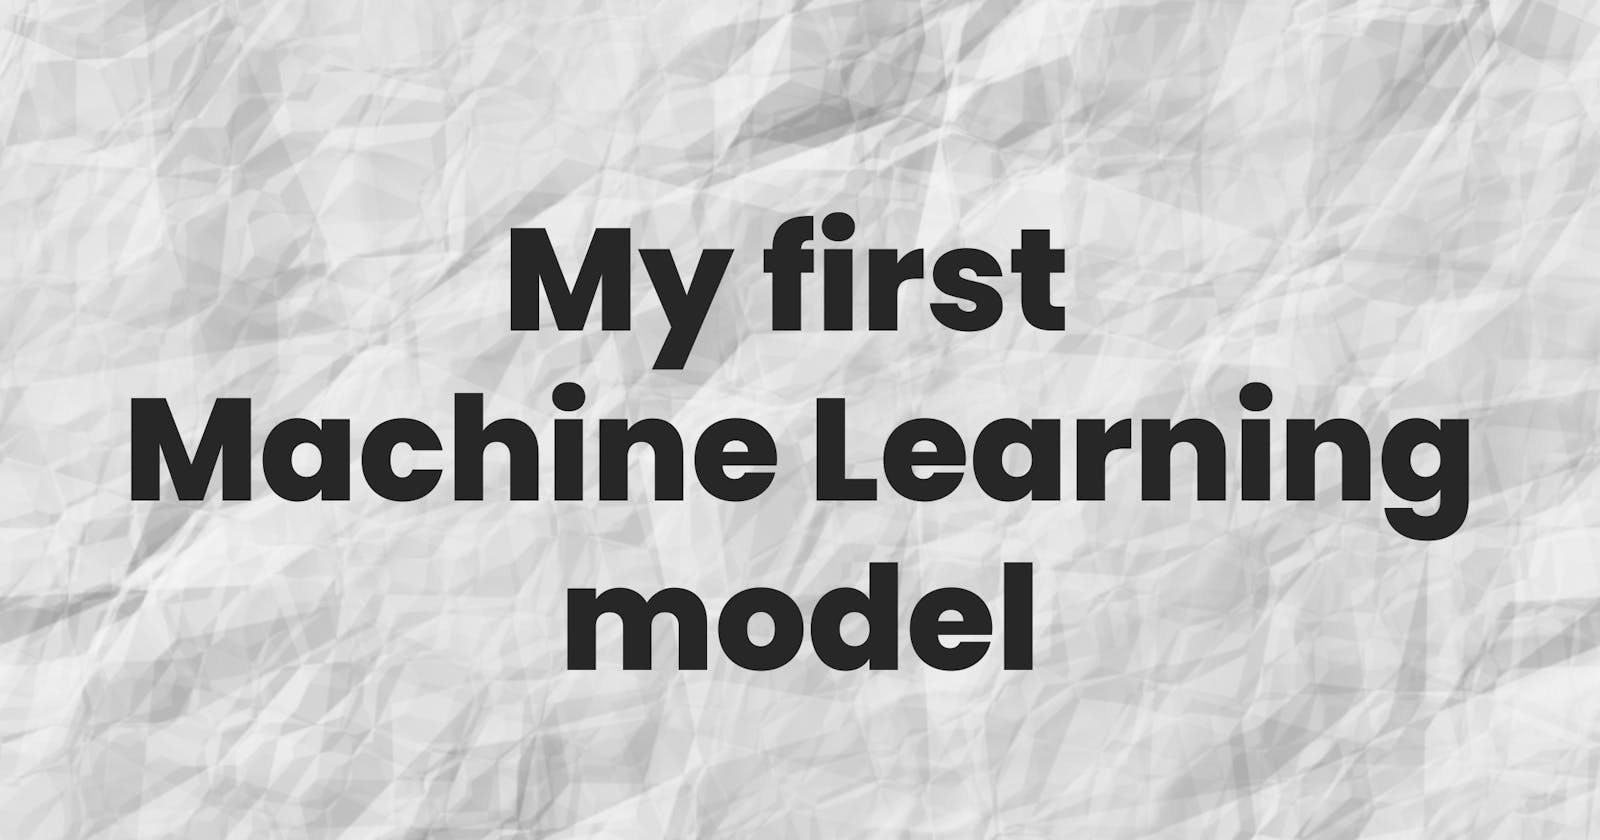 My first Machine Learning model